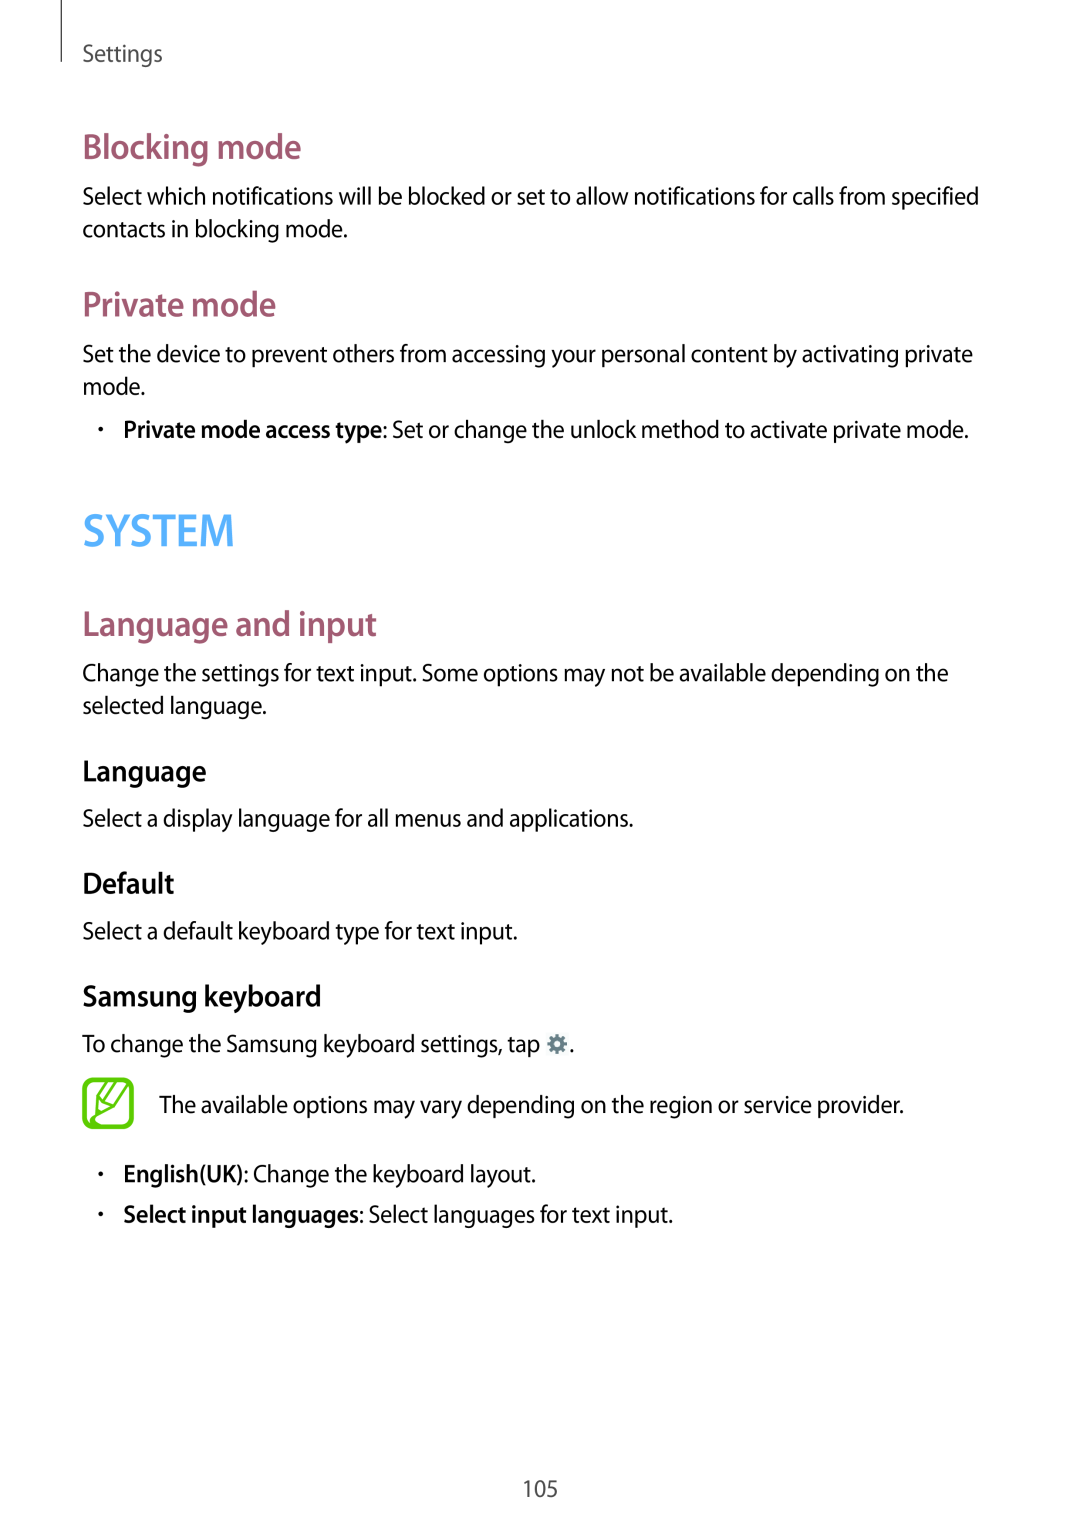 Samsung GT-I9195DKIDBT manual System, Blocking mode, Private mode, Language and input, Default, Samsung keyboard, Settings 